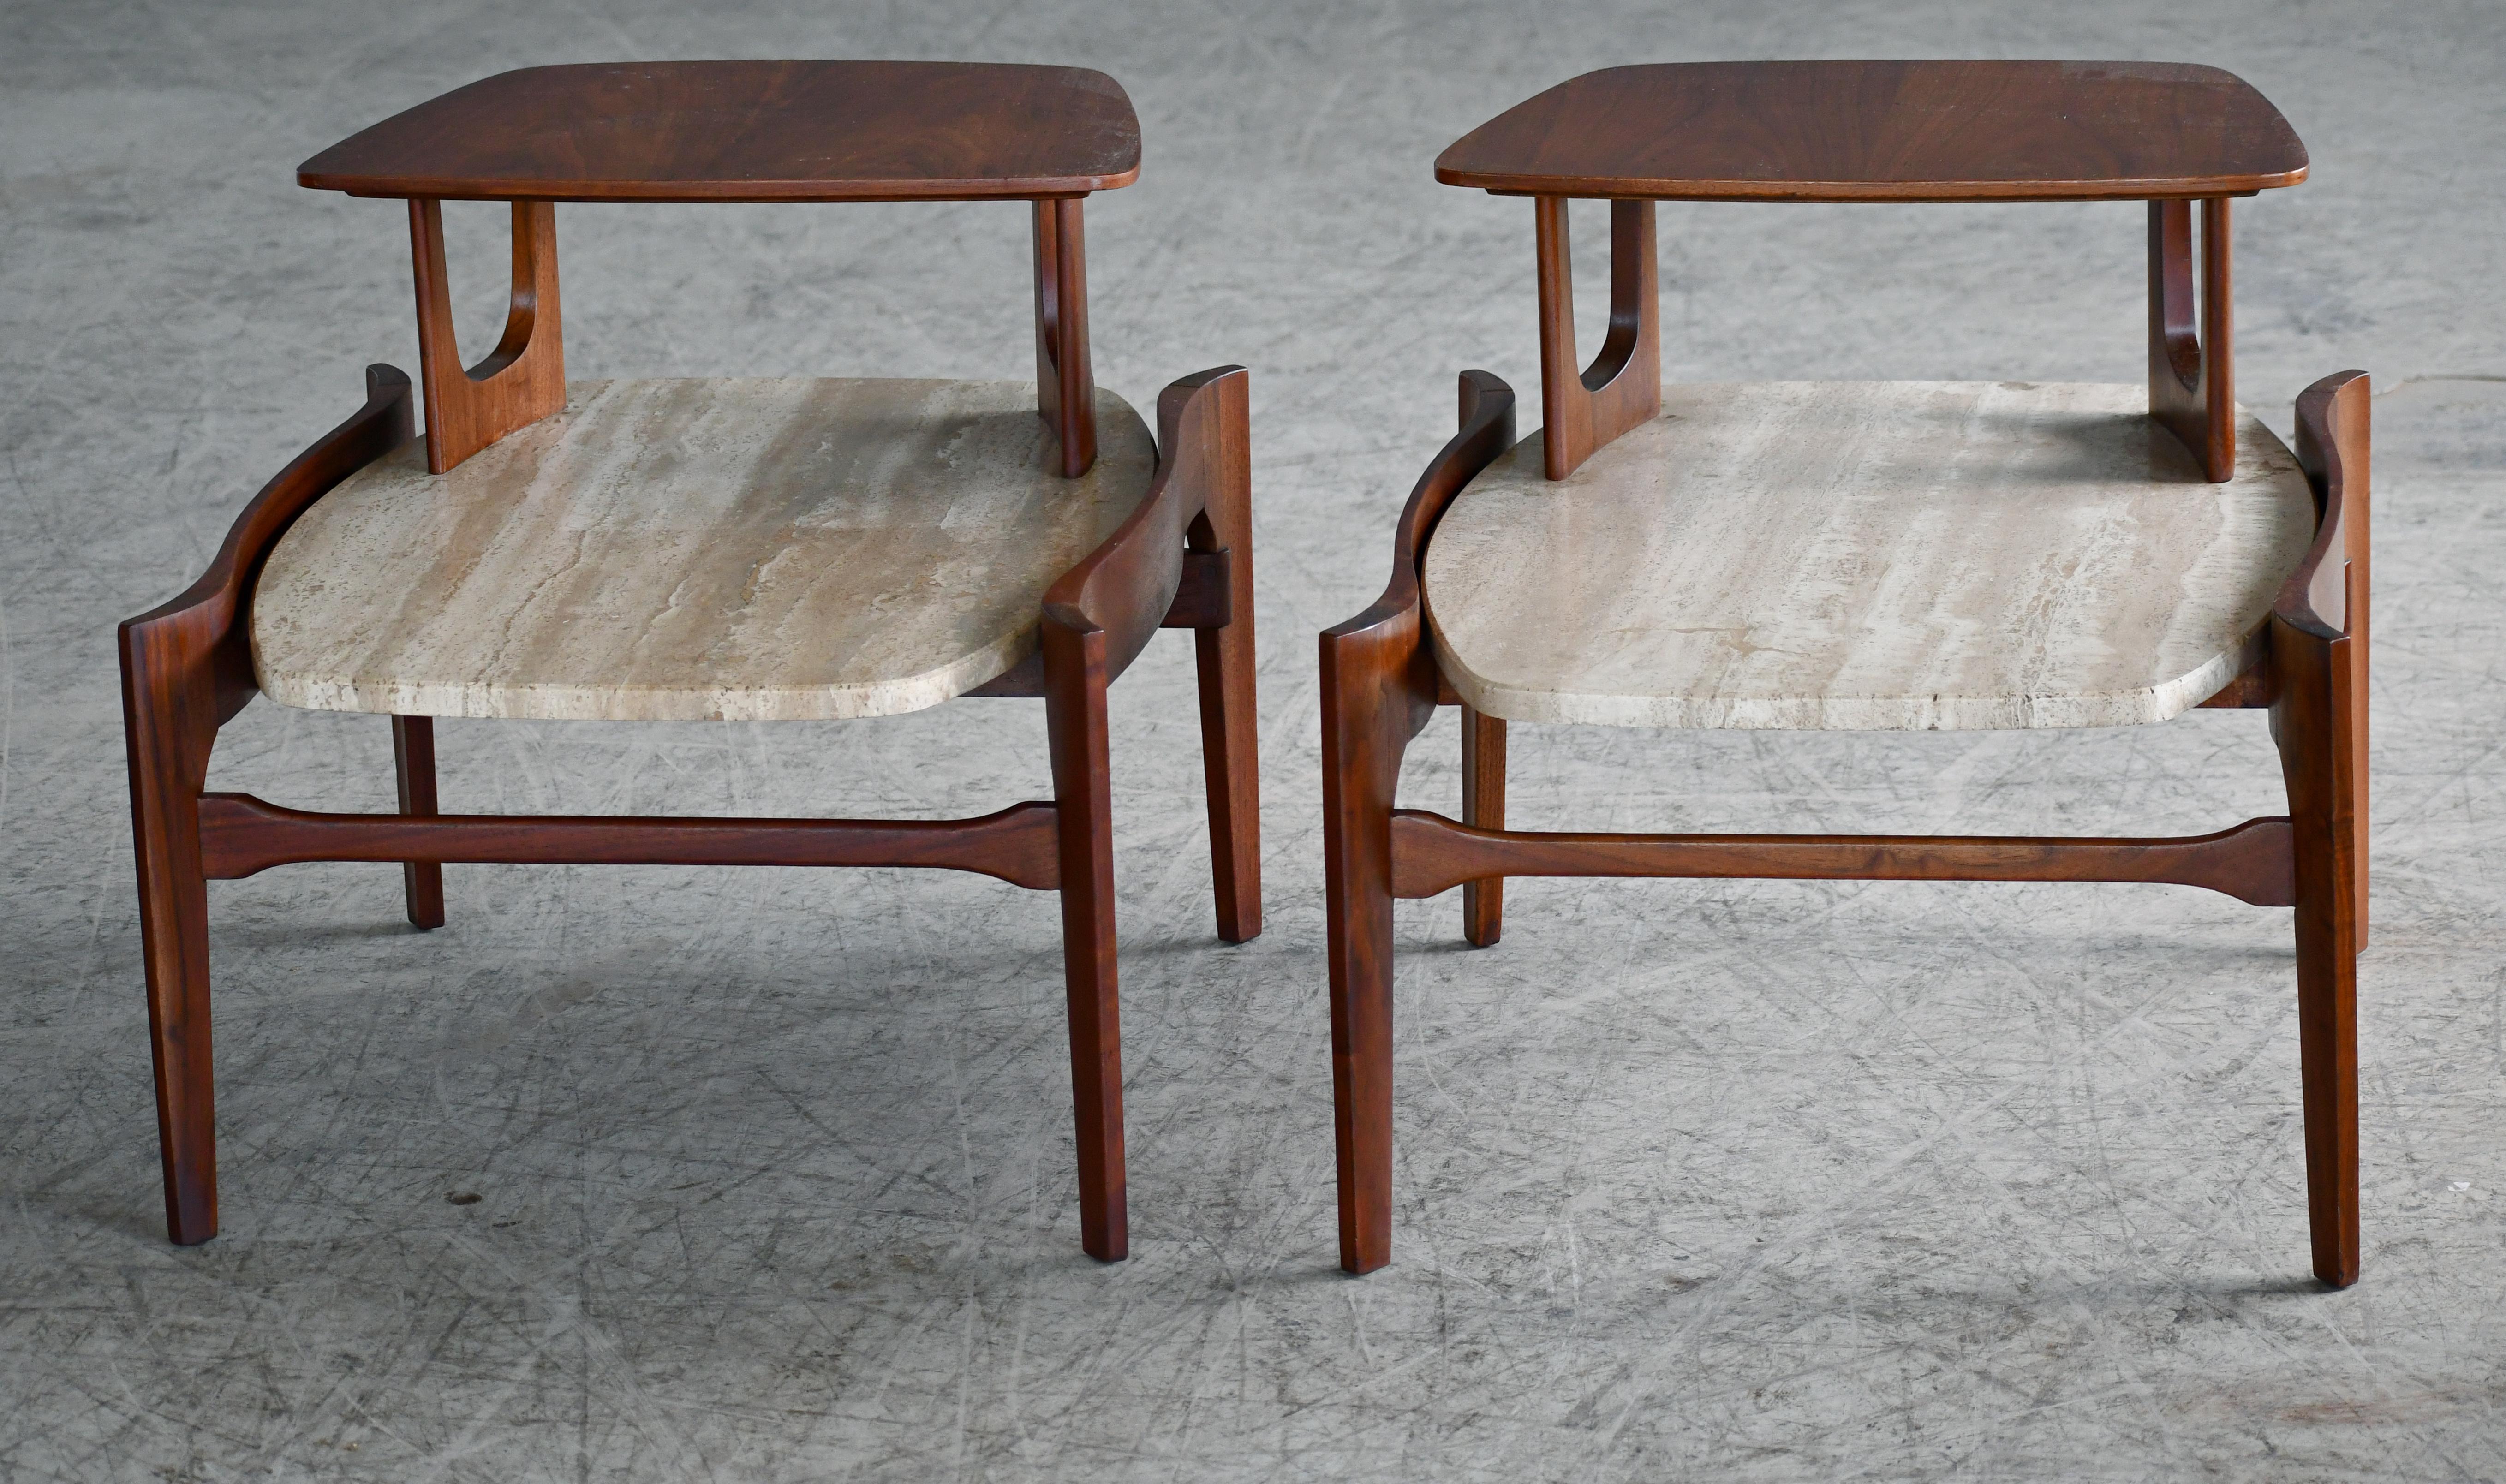 American Elegant 2-Tier Side Table Wit Italian Travertine by M. Singer & Sons, 1950s For Sale